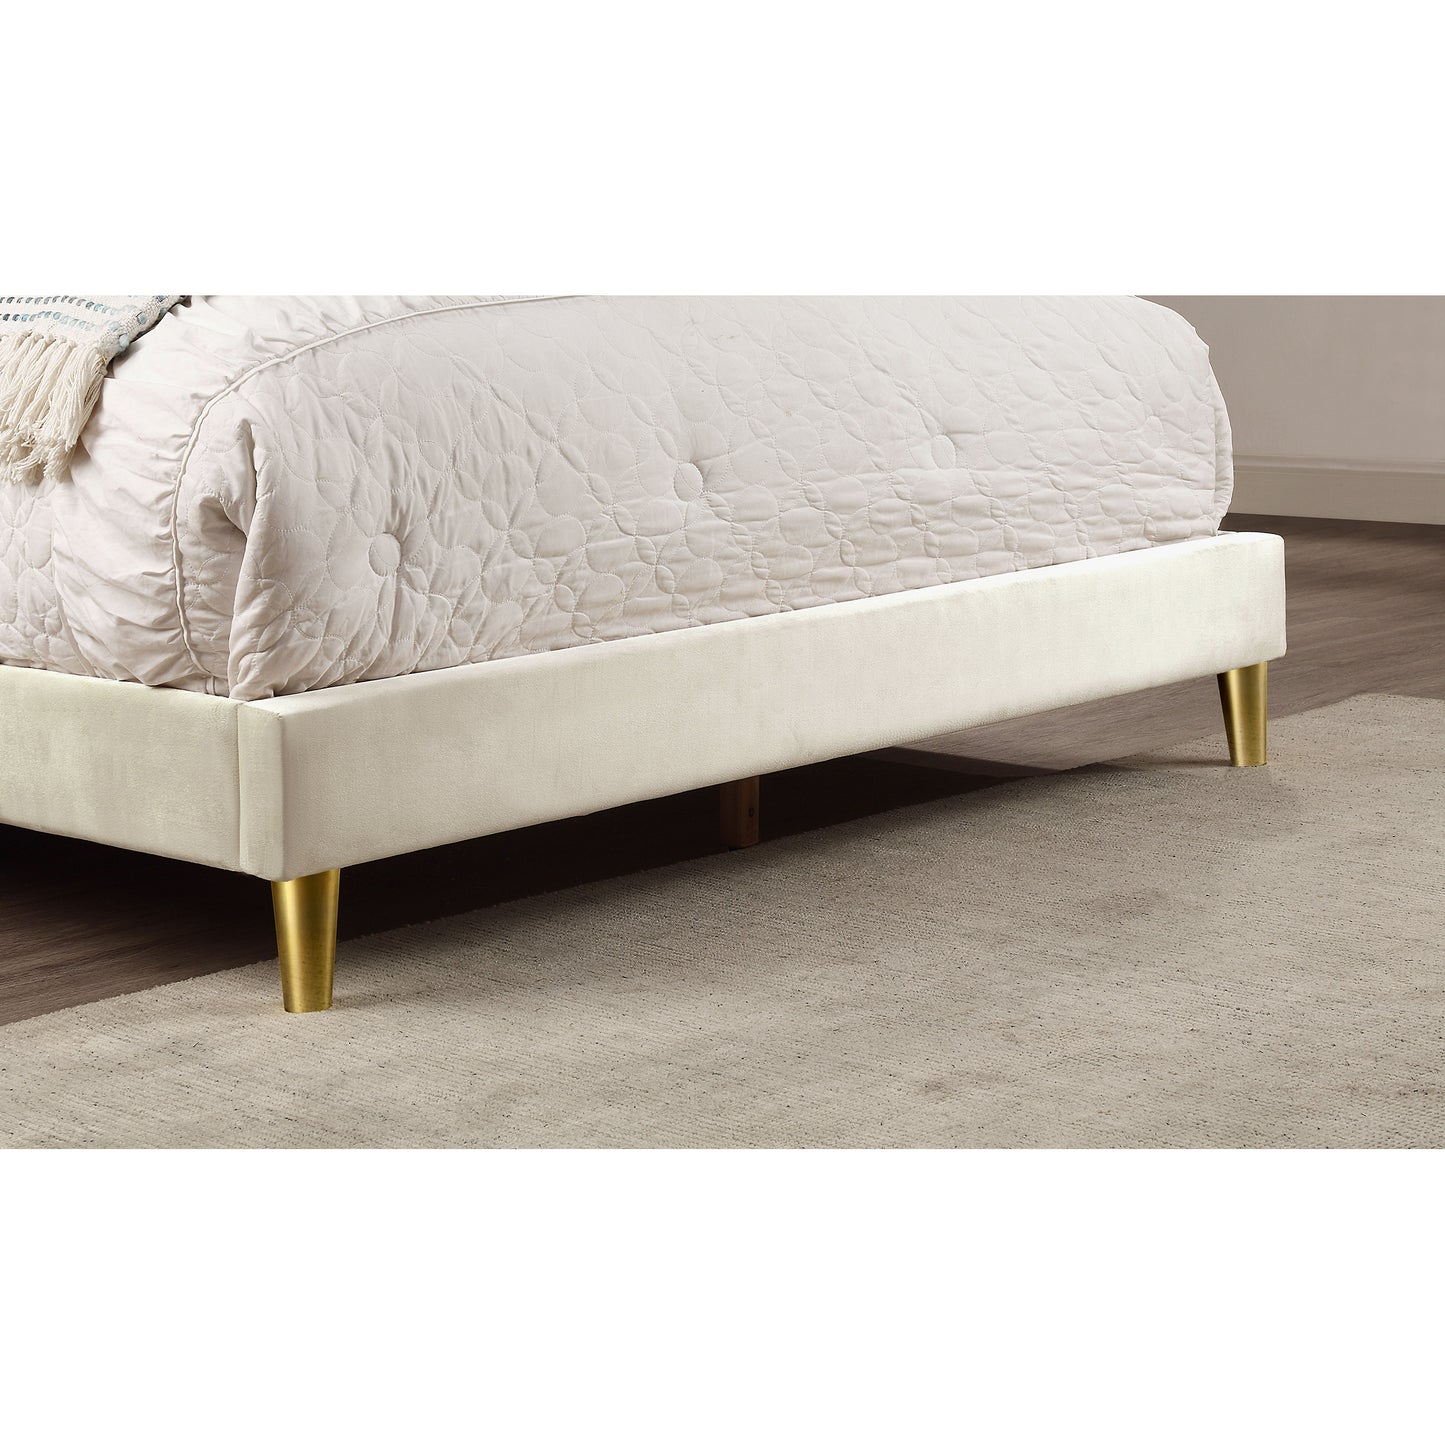 Right angled footboard close-up of a contemporary beige and gold upholstered queen bed in a bedroom with accessories